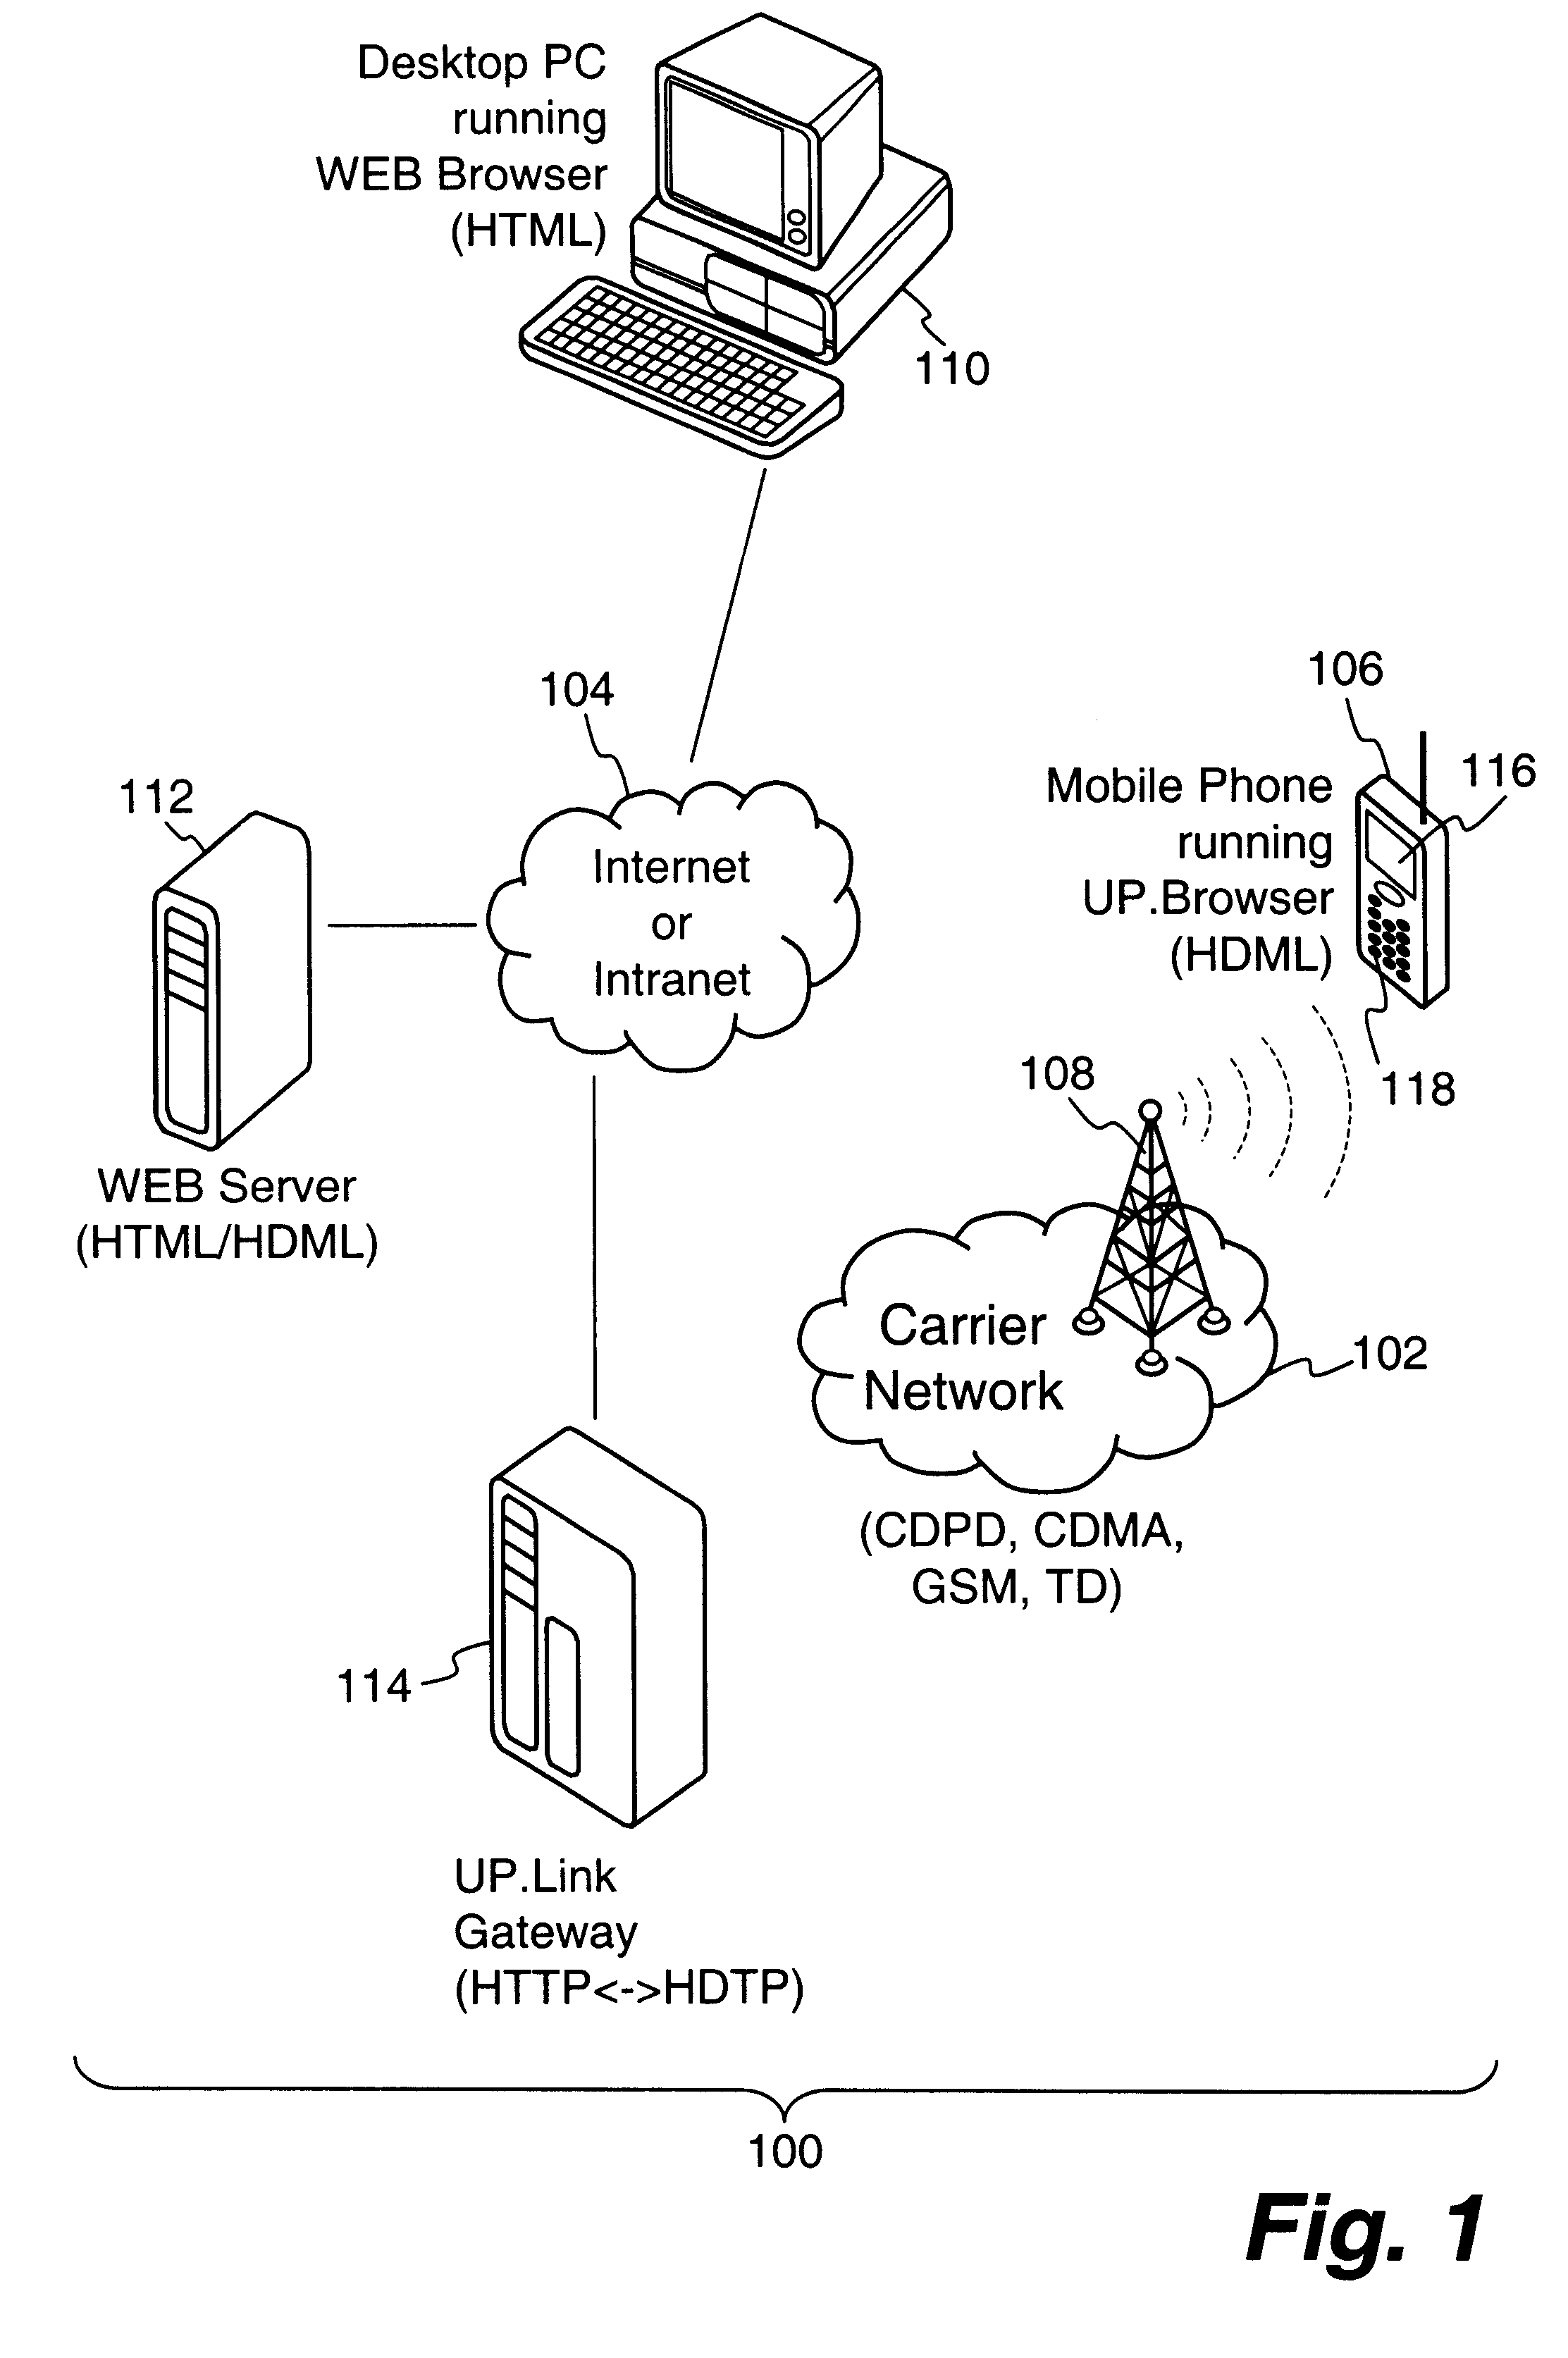 Method and apparatus for conducting crypto-ignition processes between thin client devices and server devices over data networks